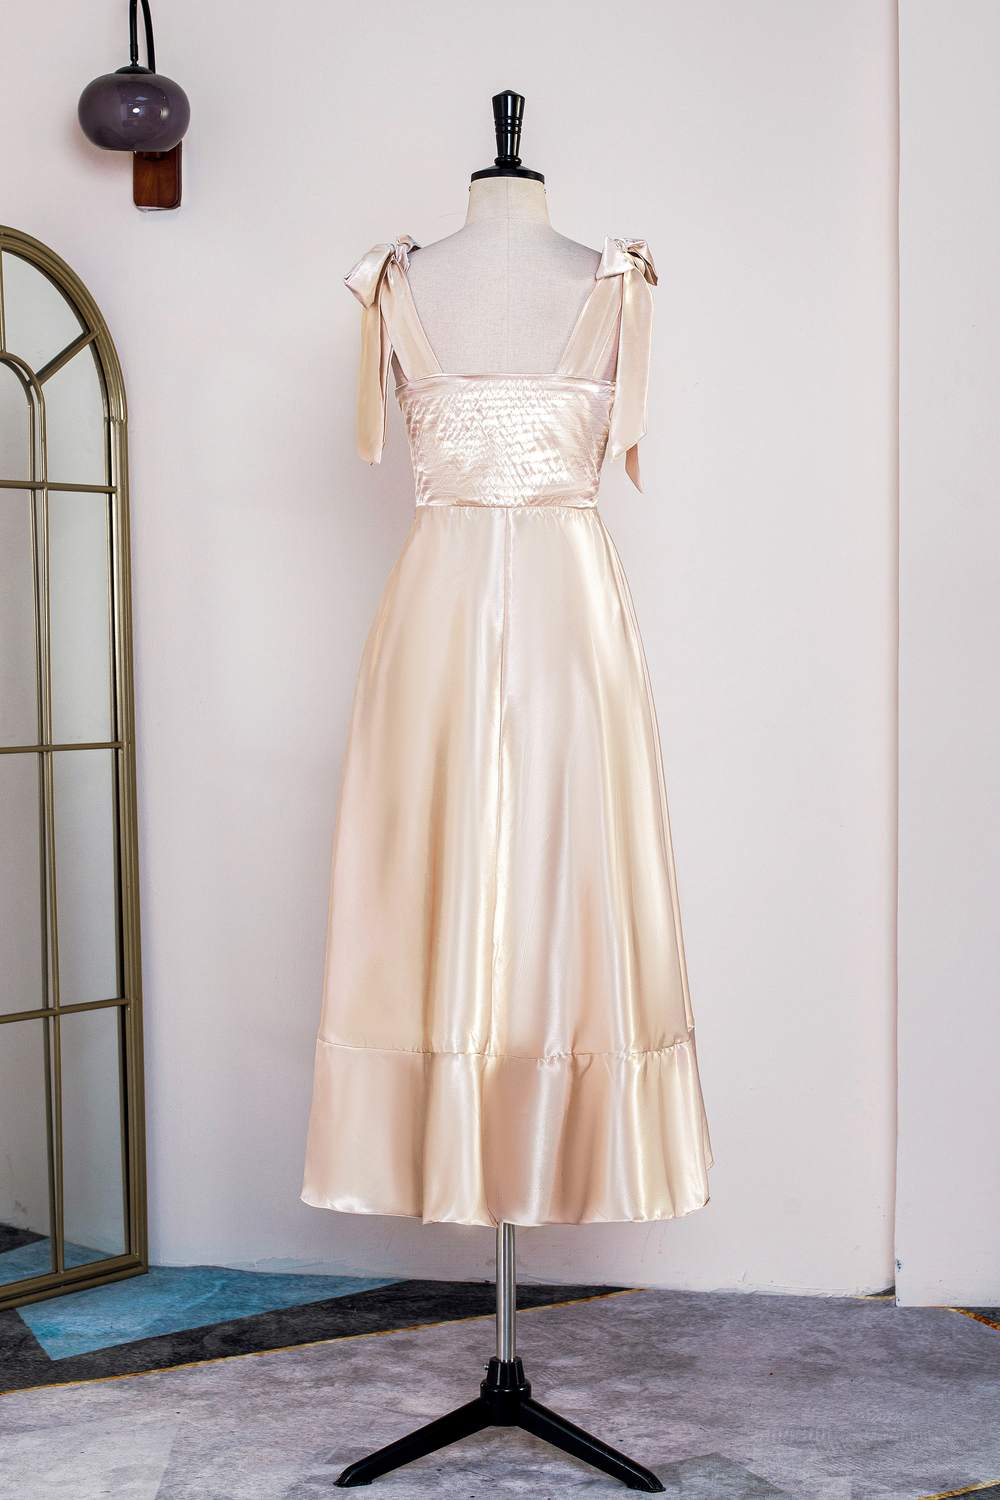 Homecomming Dresses Floral, Champagne Bow Tie Straps A-line Satin Tea-Length Bridesmaid Dress